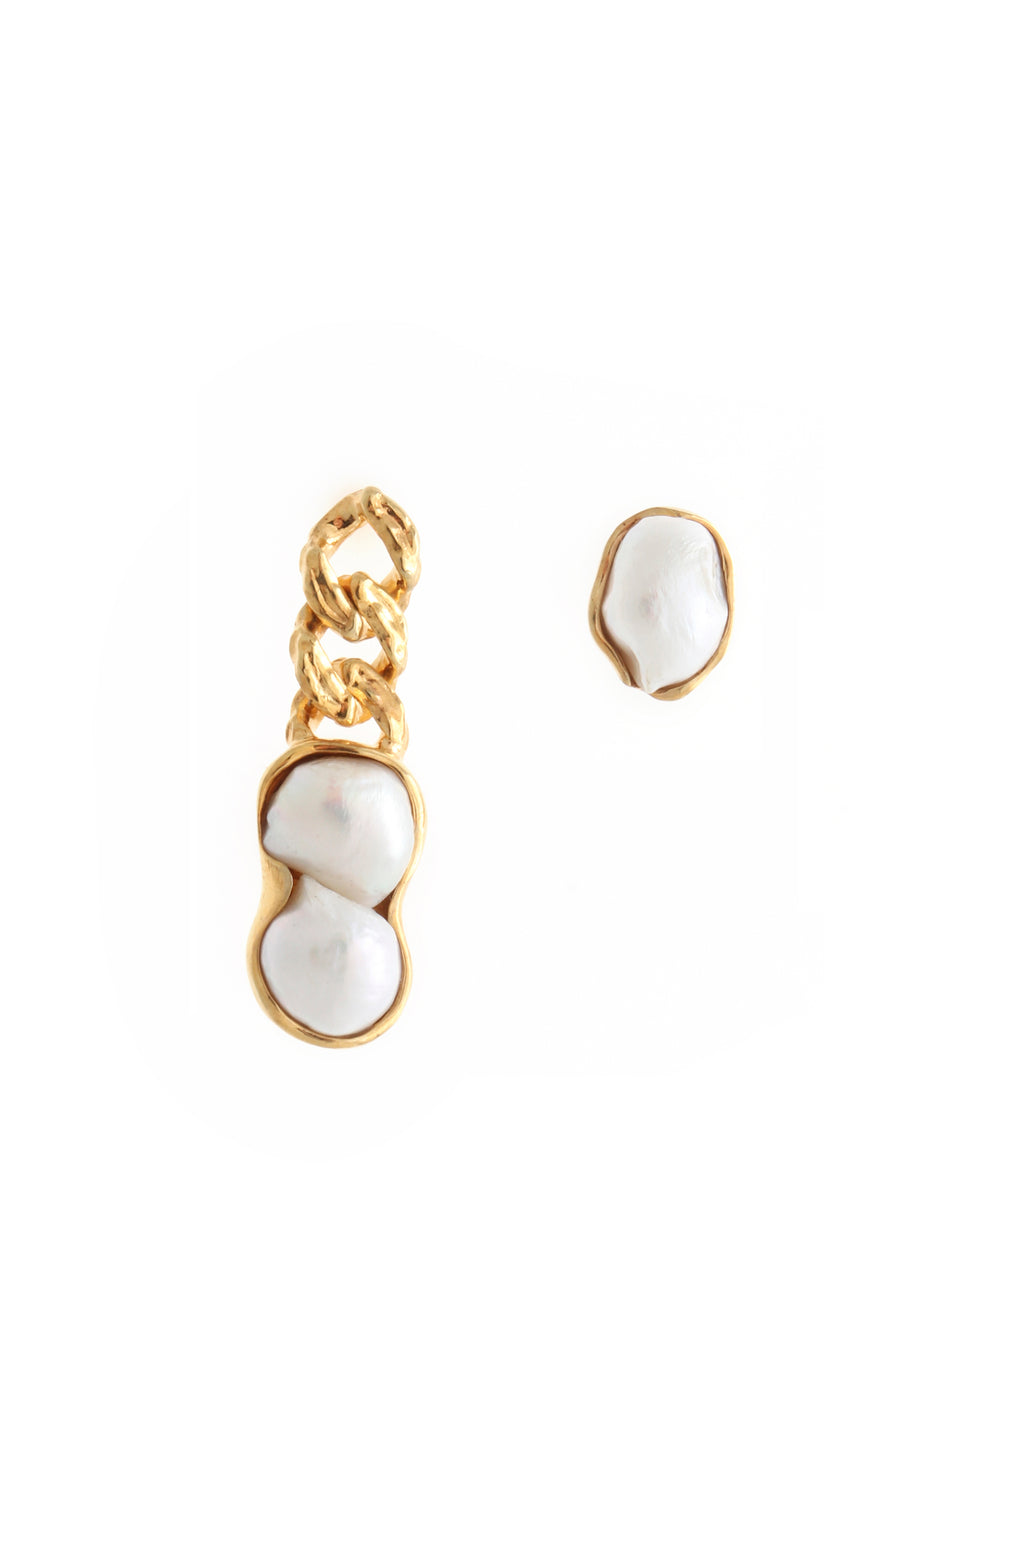 ASYMMETRICAL CHAIN EARRINGS WITH CULTURED PEARLS